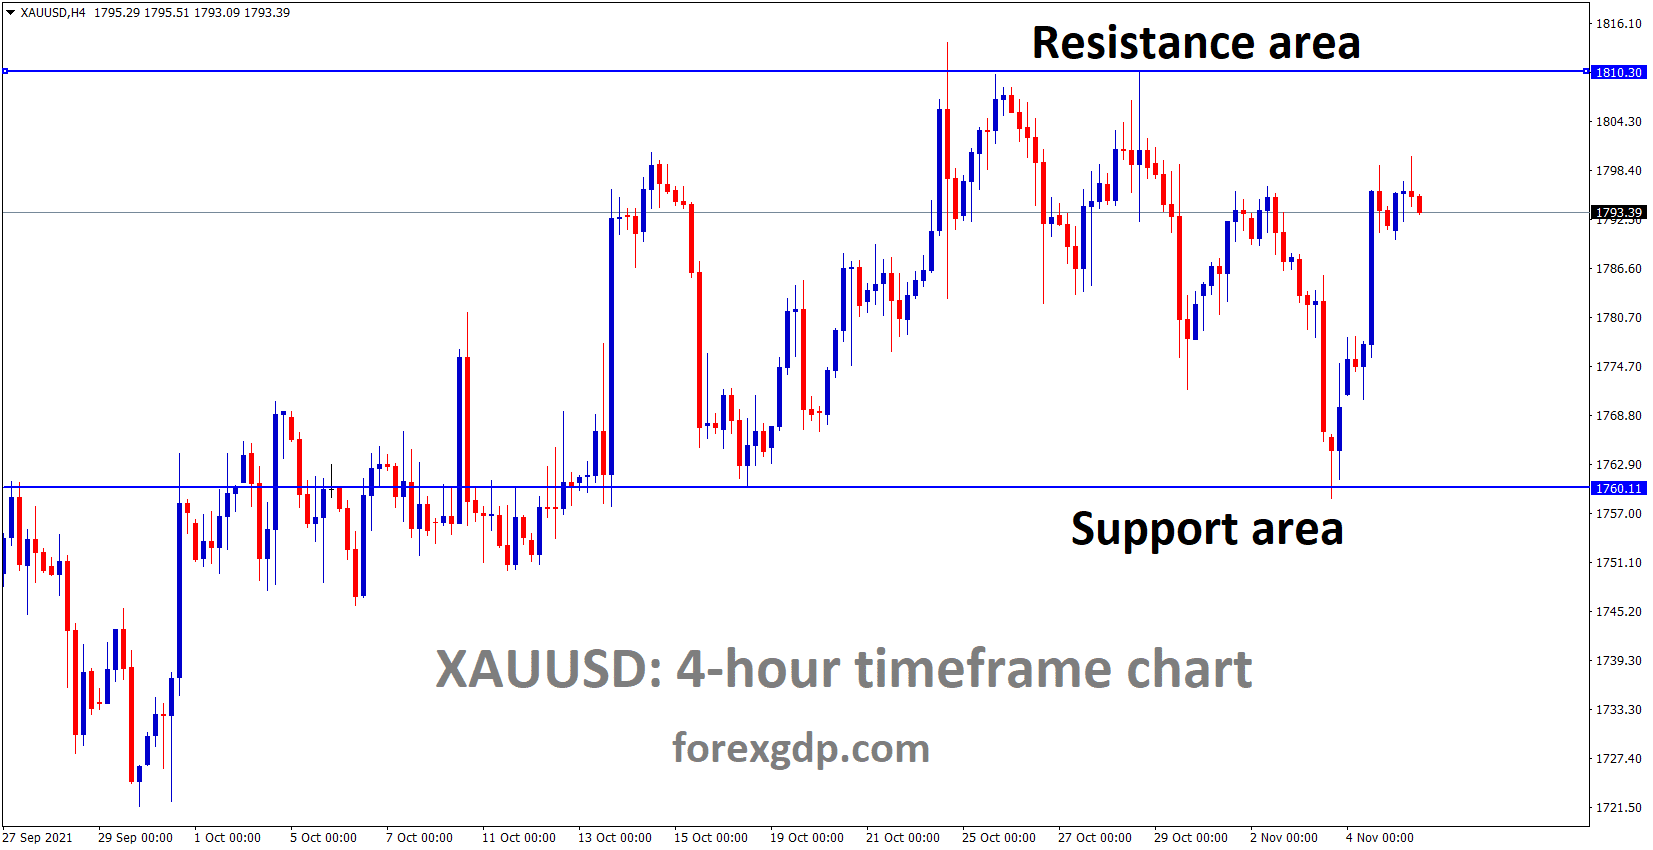 XAUUSD Gold prices are moving in the consolidation market and the price has been rebounded from the recent support area.